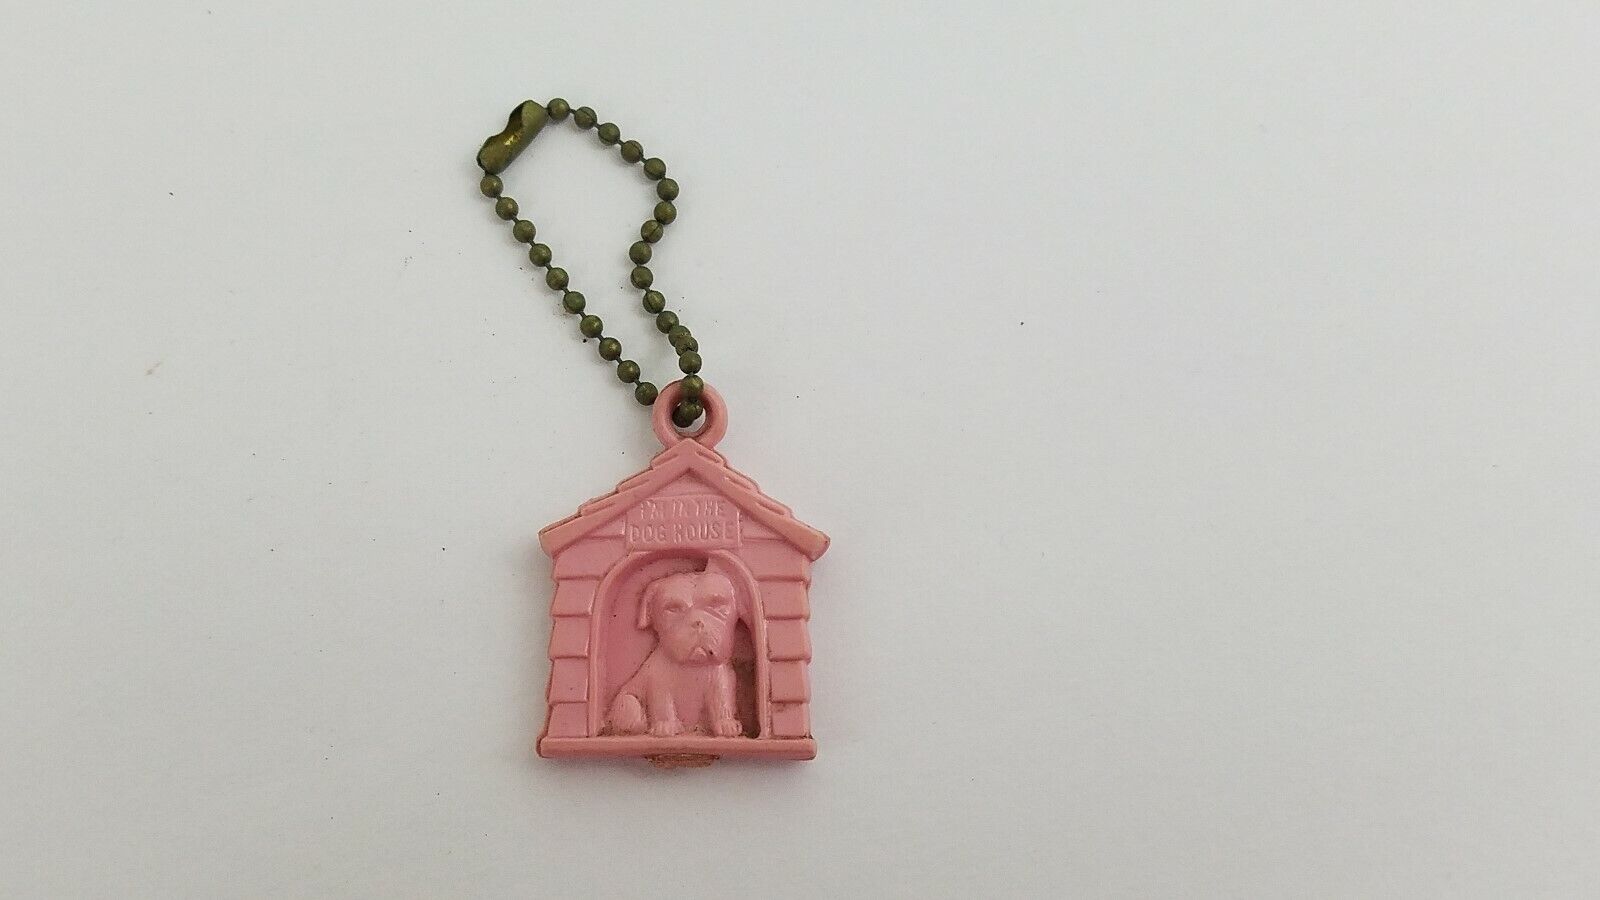 I'm In The Dog House Keychain Fob Figural Pink Plastic Vintage Marital Bliss